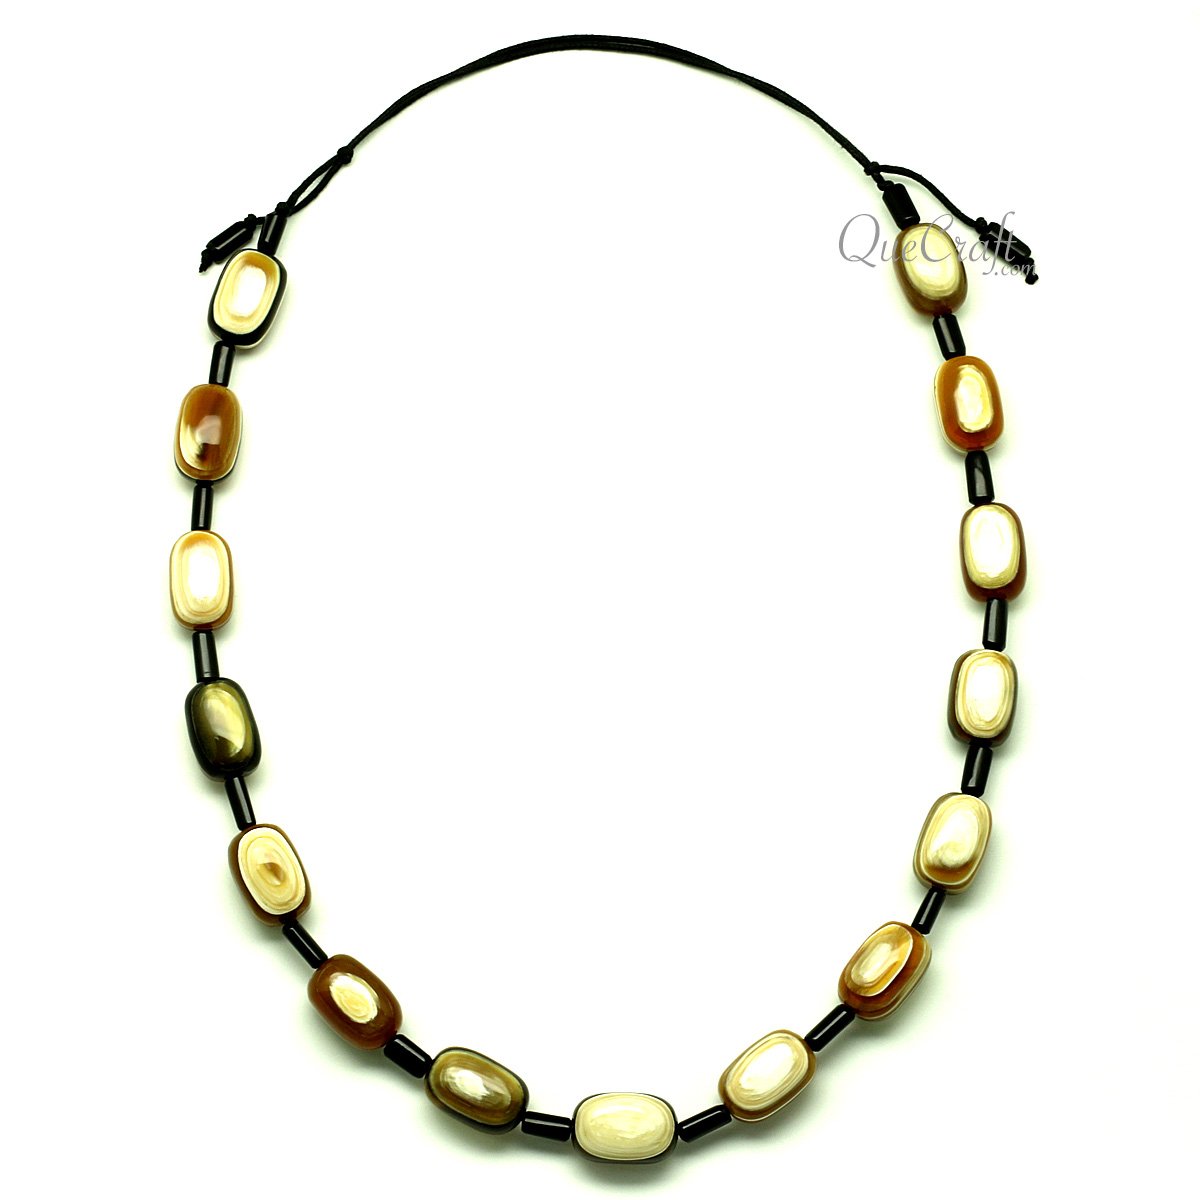 Horn String Necklace #12981 - HORN JEWELRY